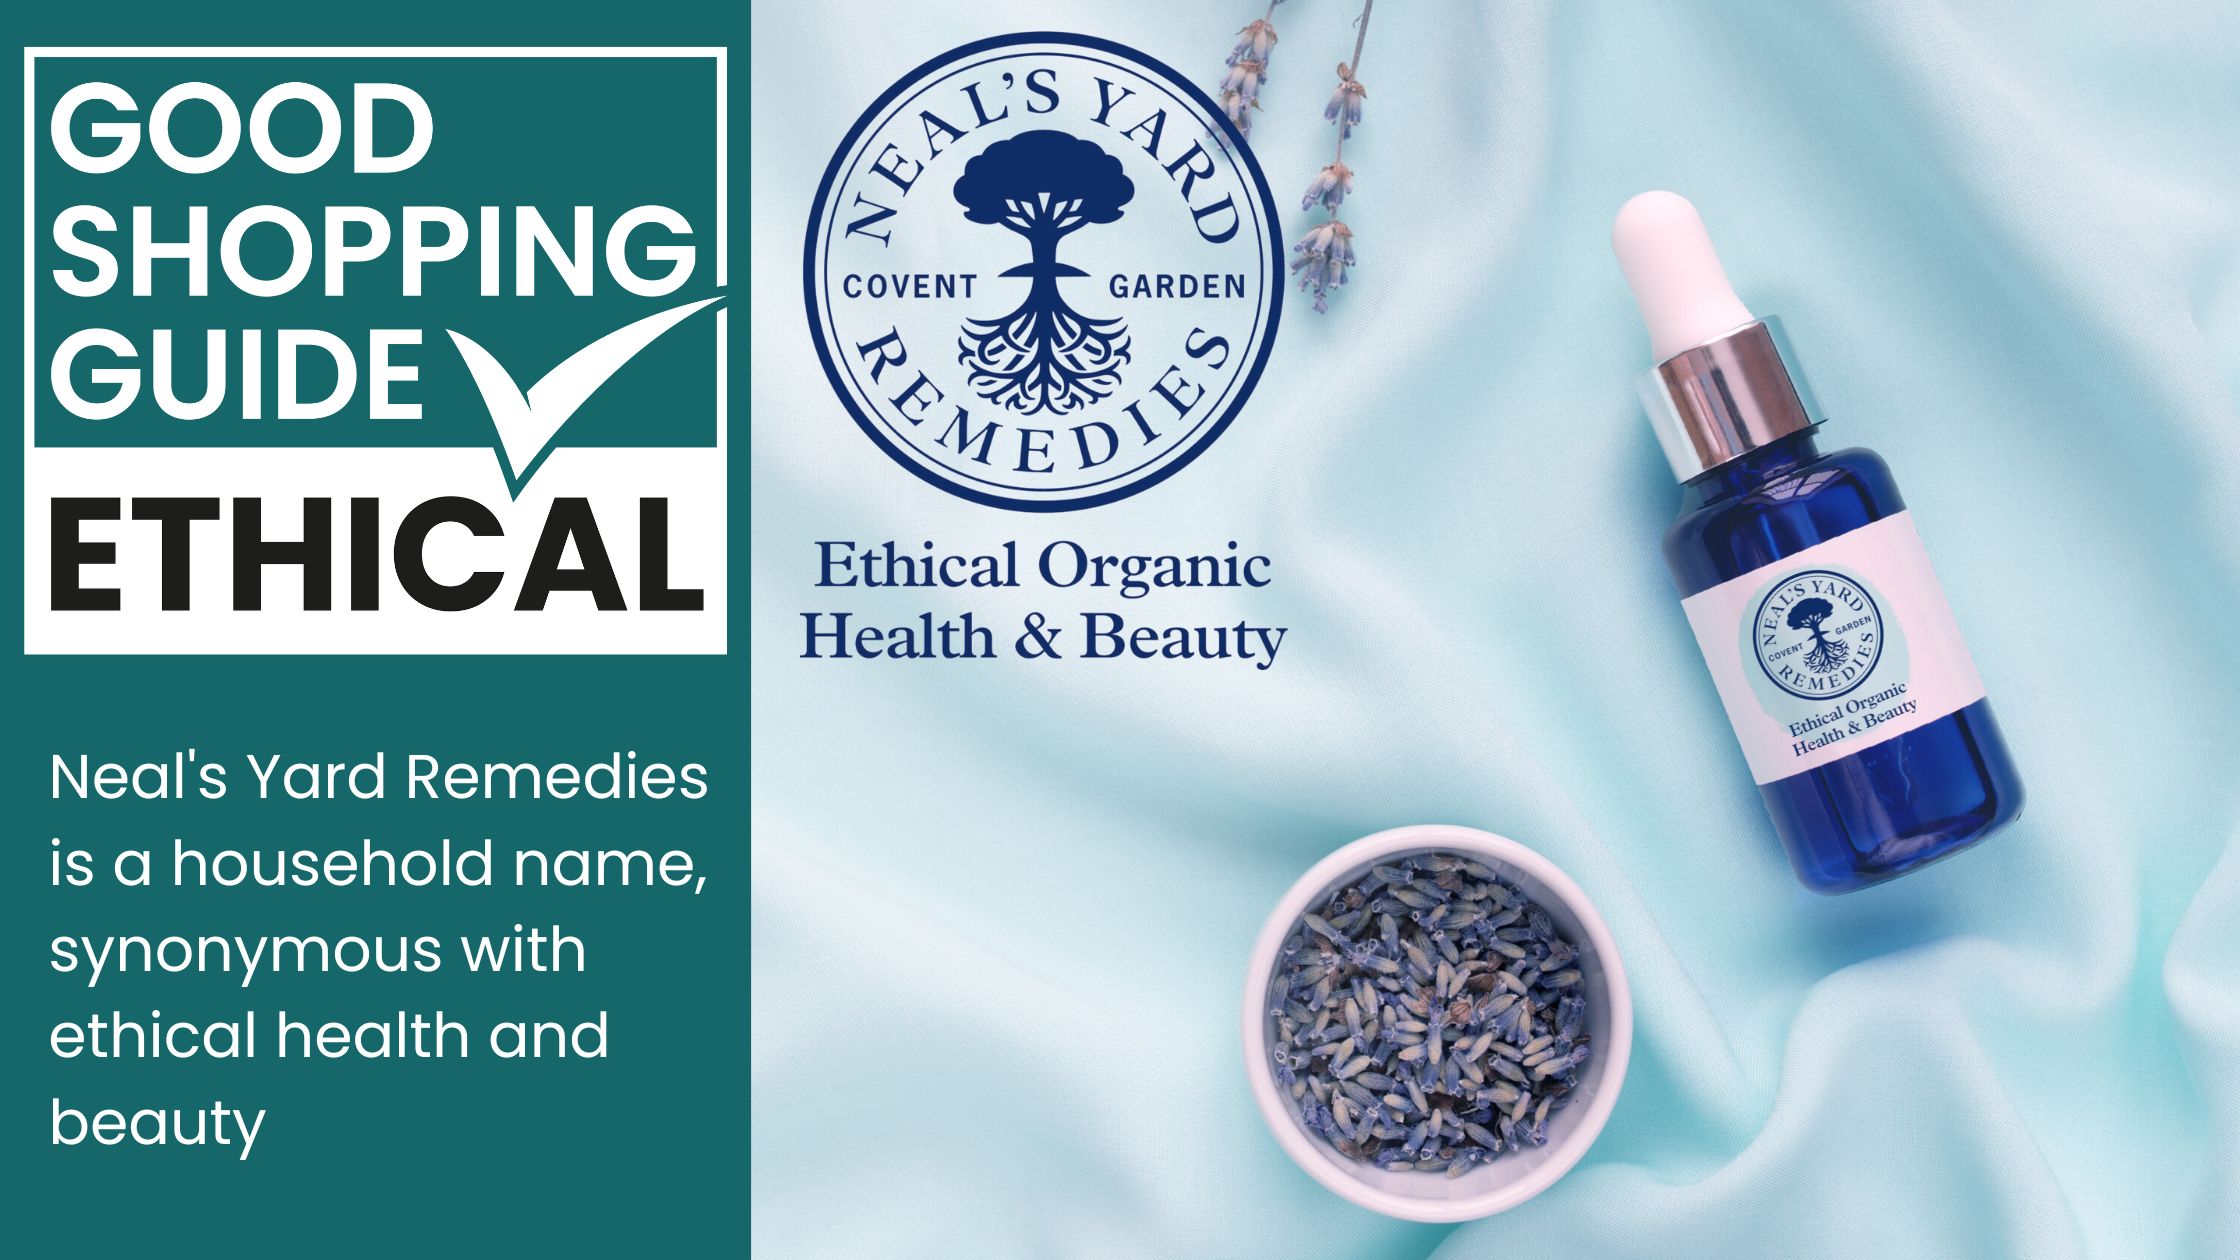 Neals Yard Remedies ethical organisation by The Good Shopping Guide